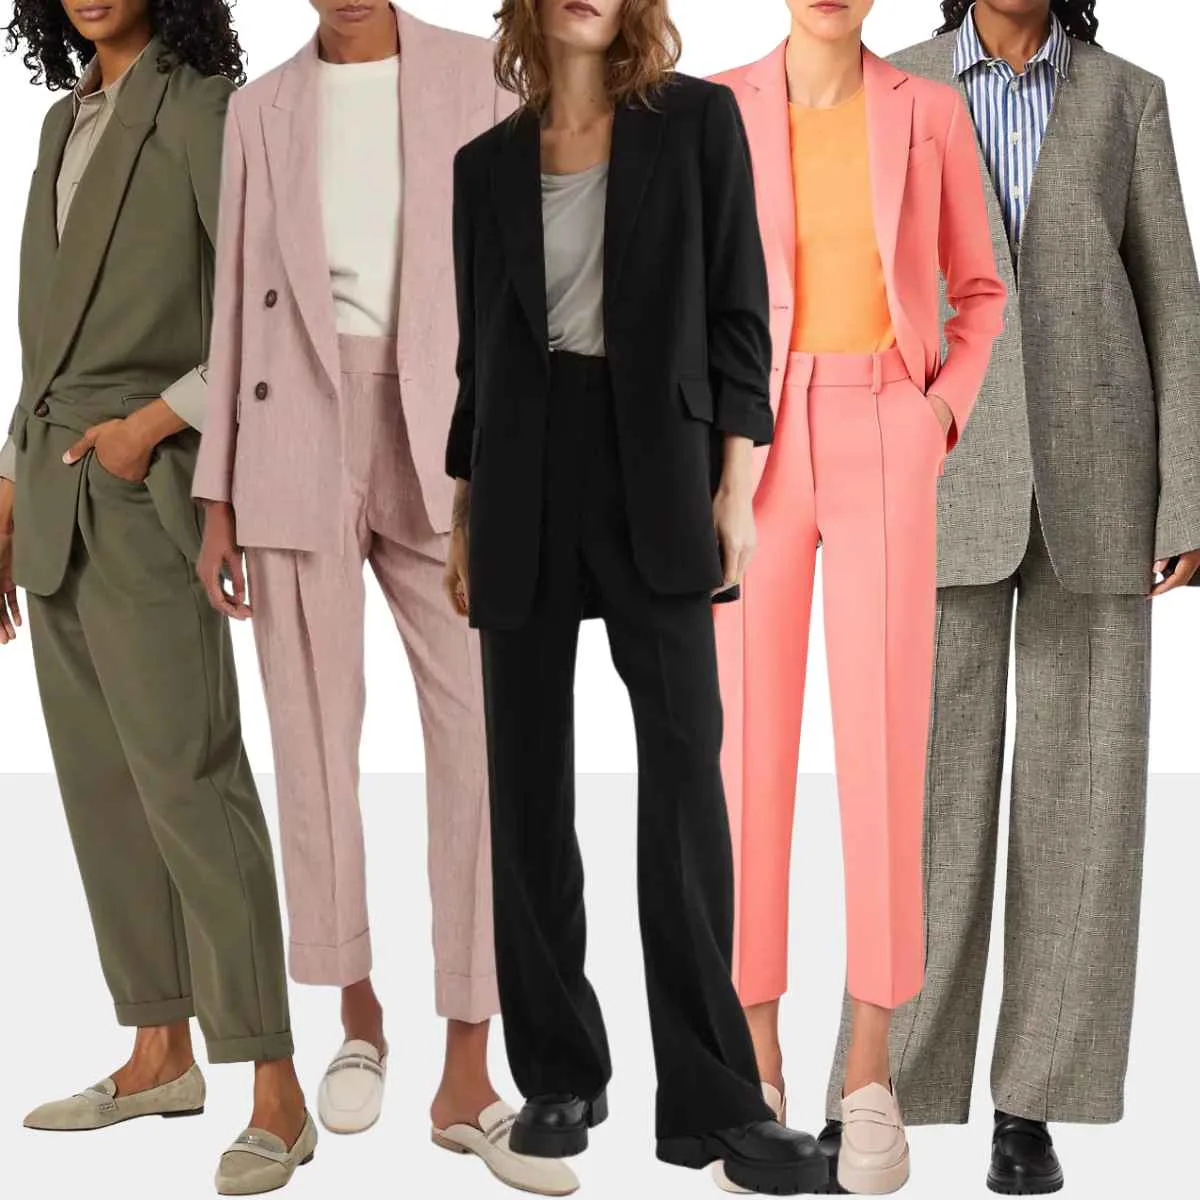 Collage of 5 women wearing various pantsuits with loafers.